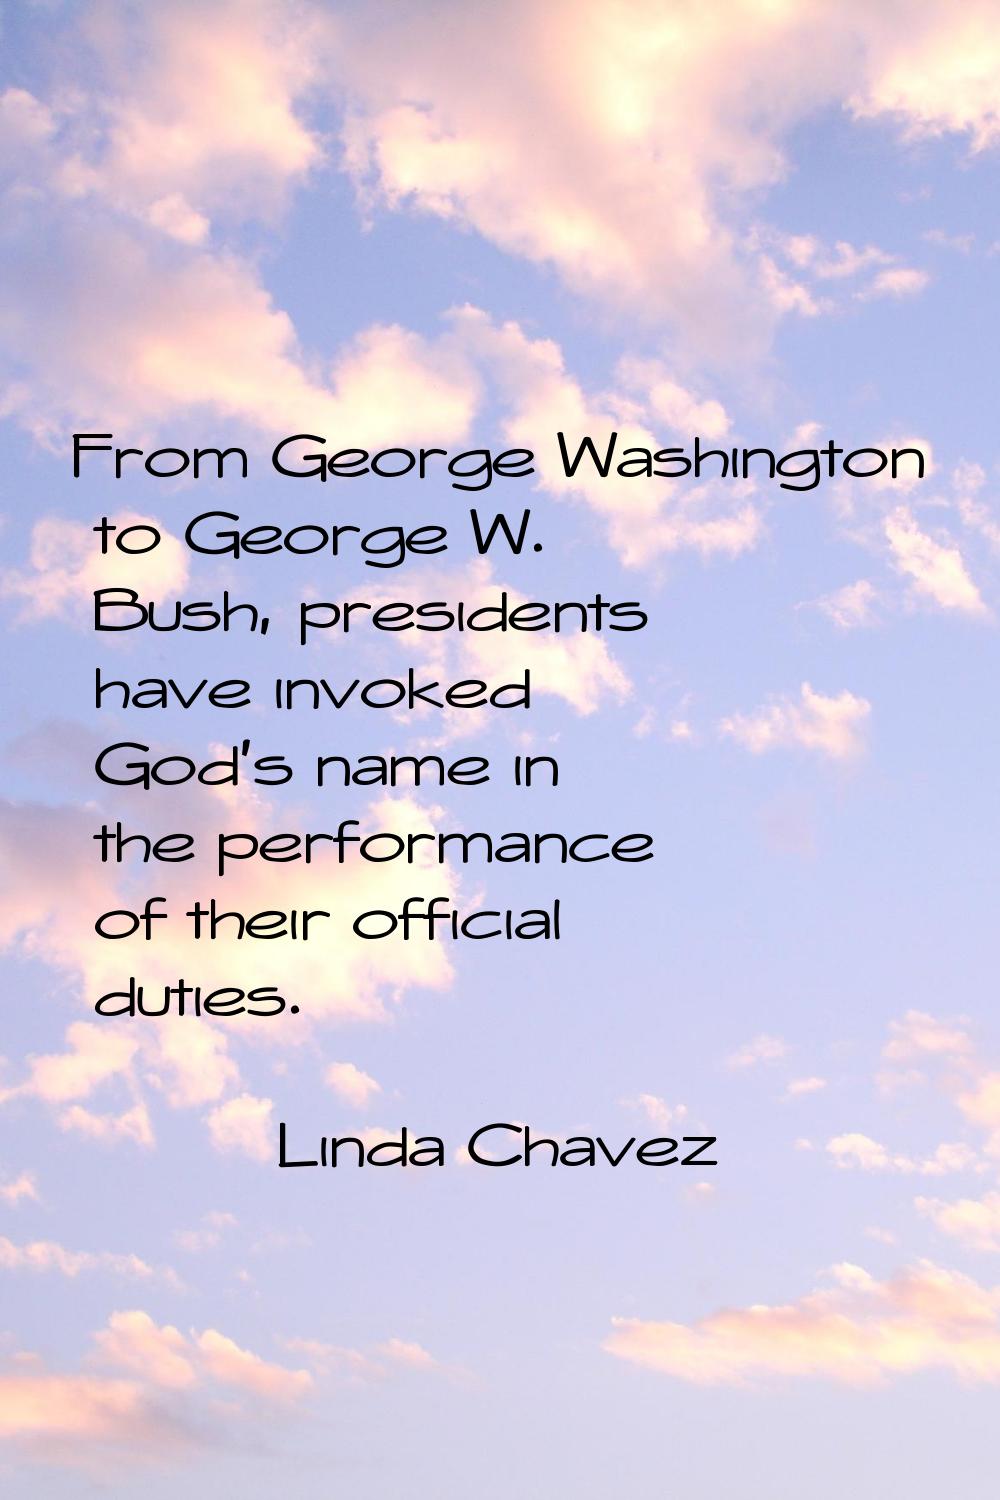 From George Washington to George W. Bush, presidents have invoked God's name in the performance of 